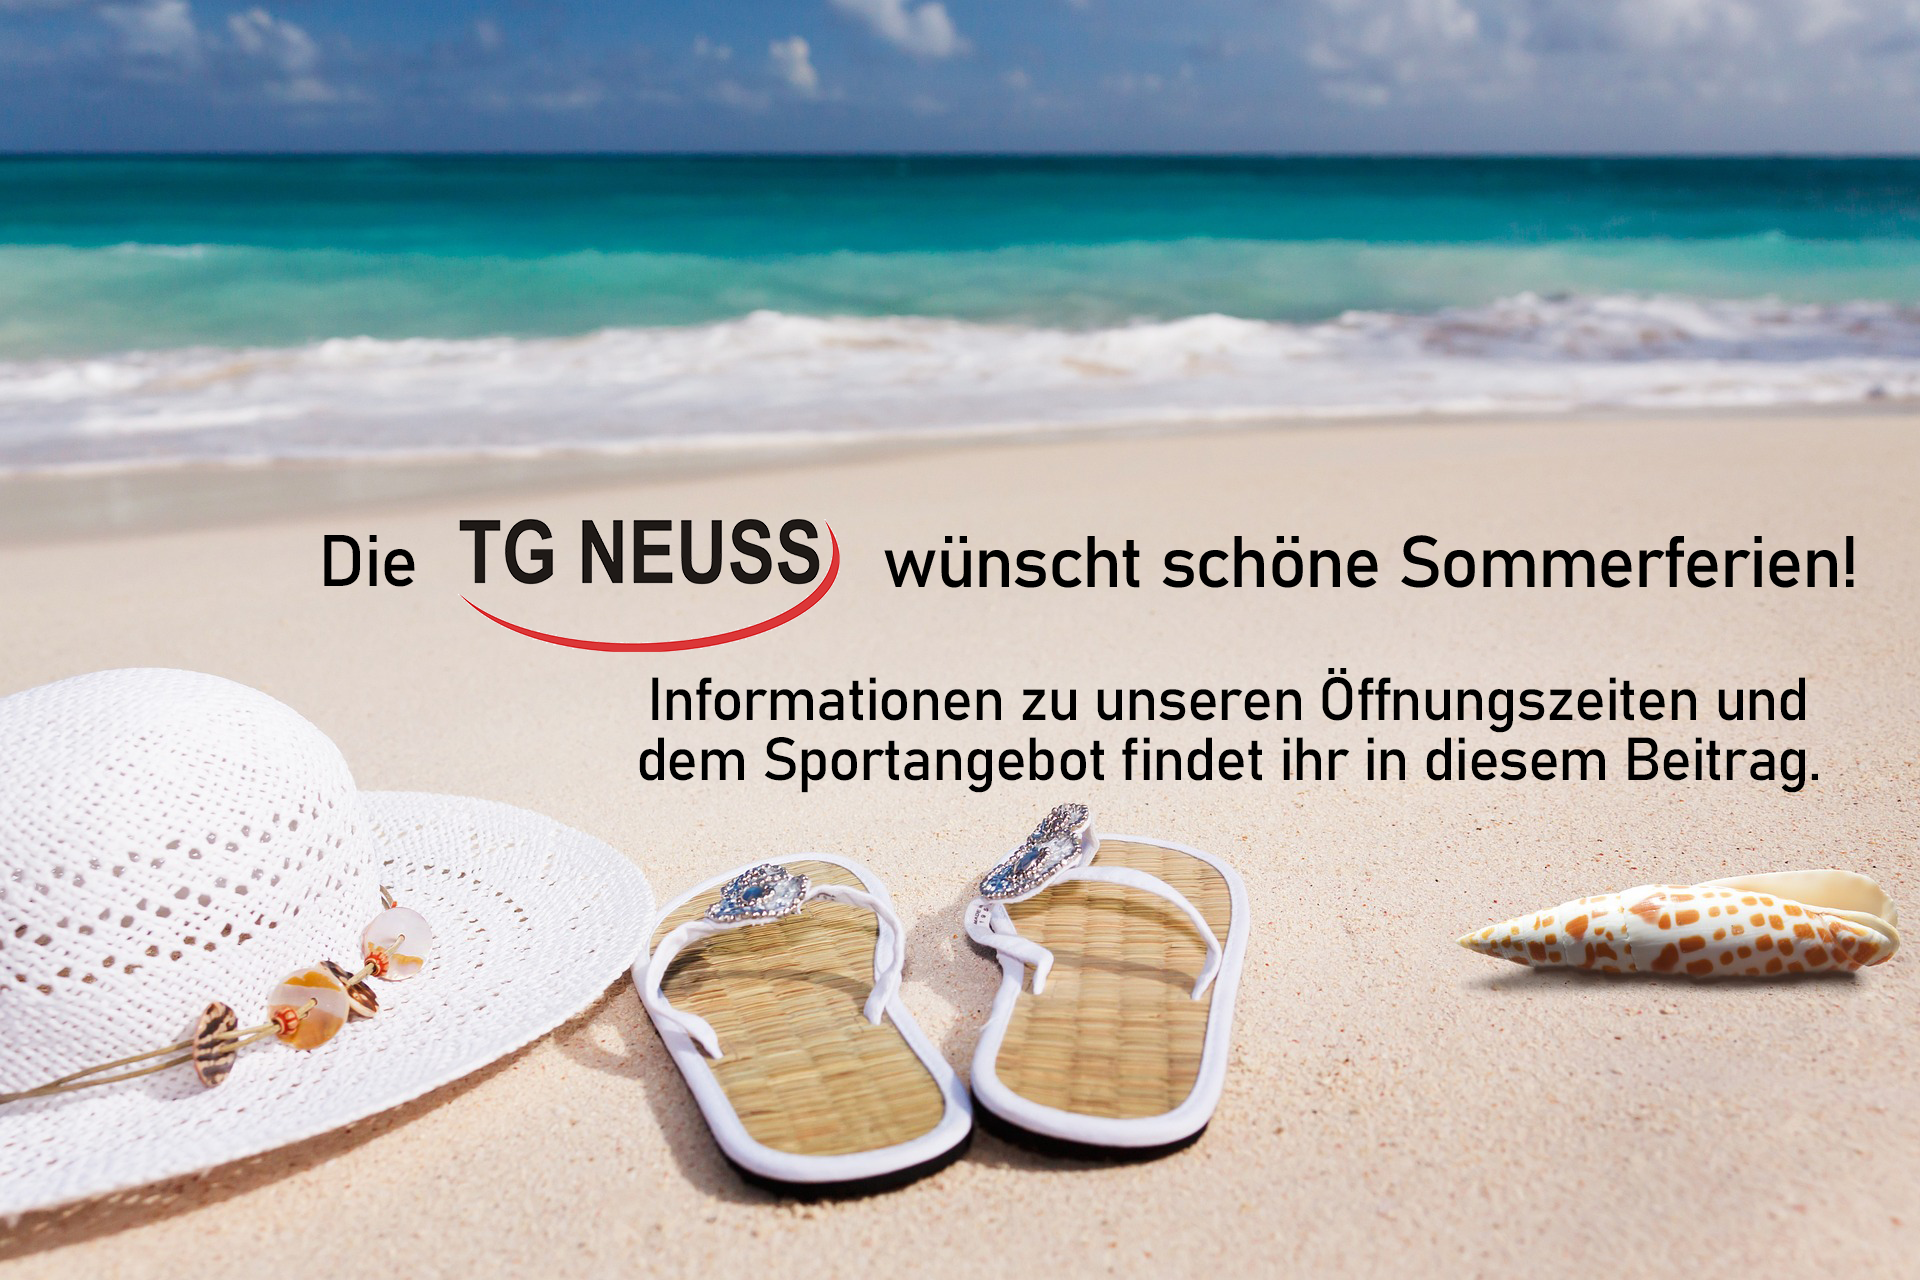 You are currently viewing Infos Sommerferien